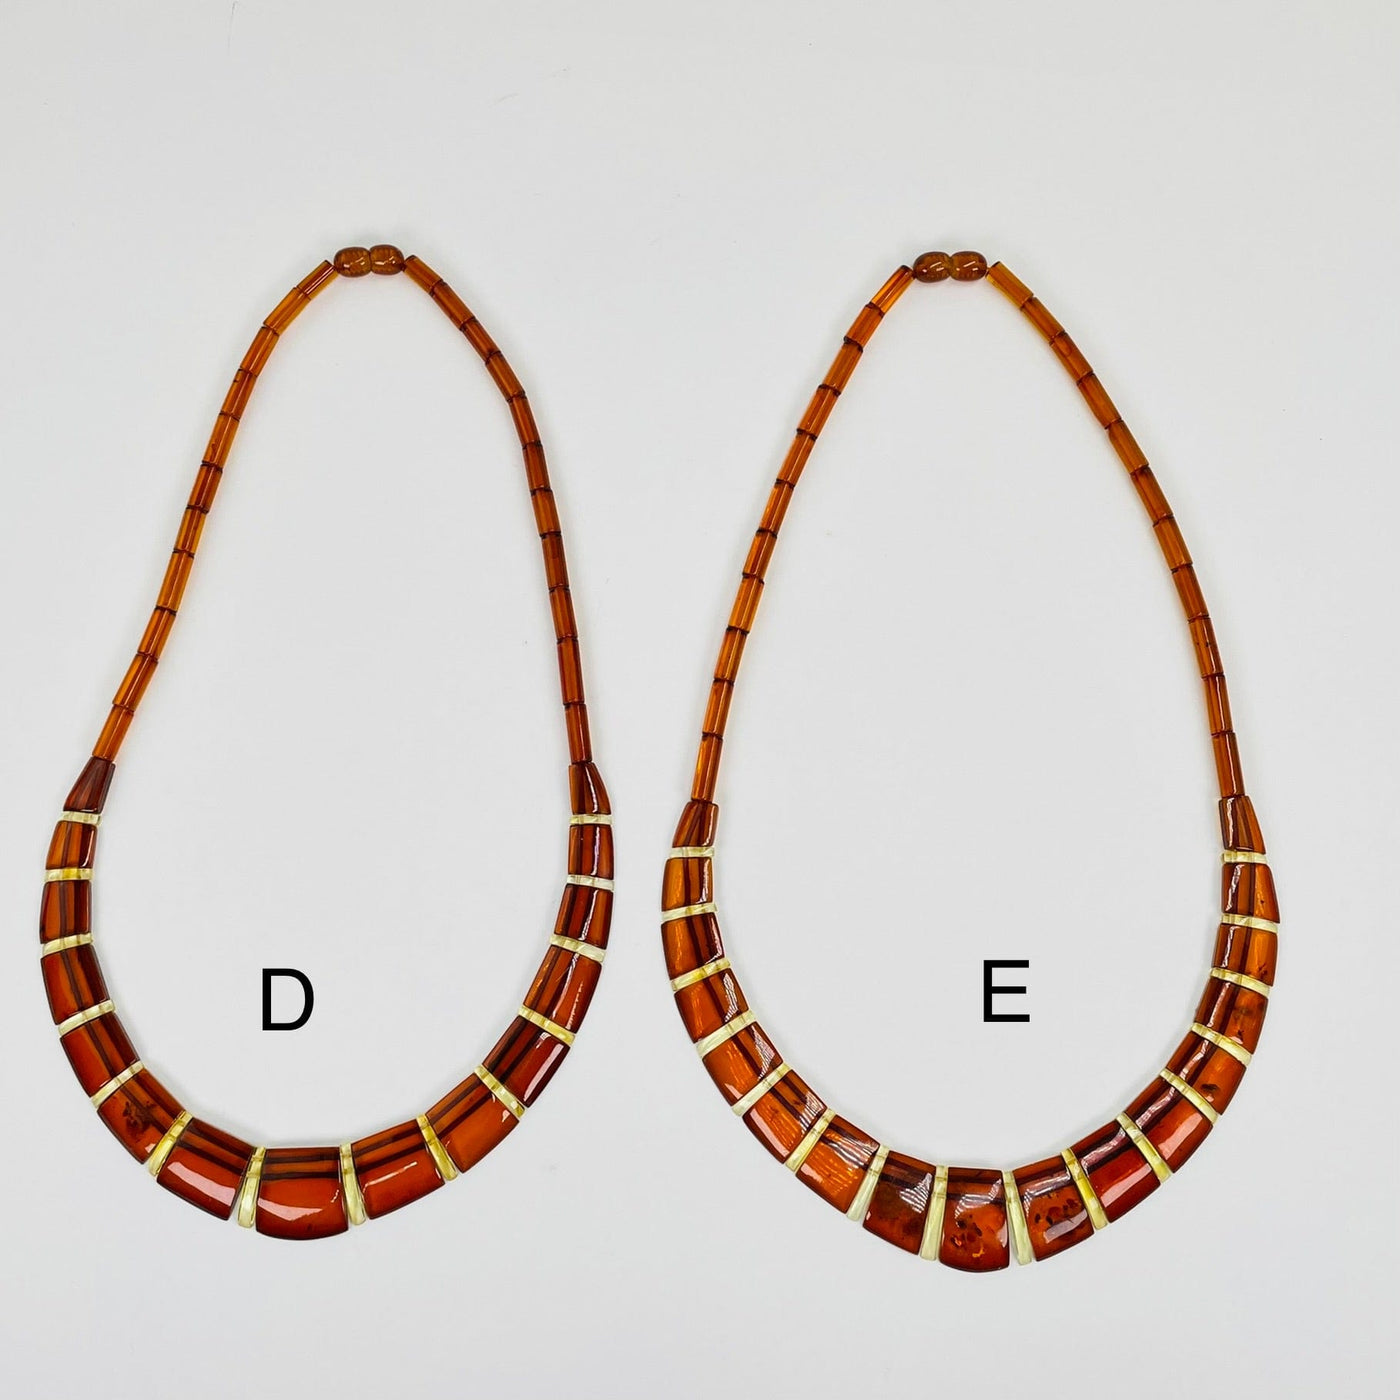 Aerial view of necklace options d and e displayed on a white surface.